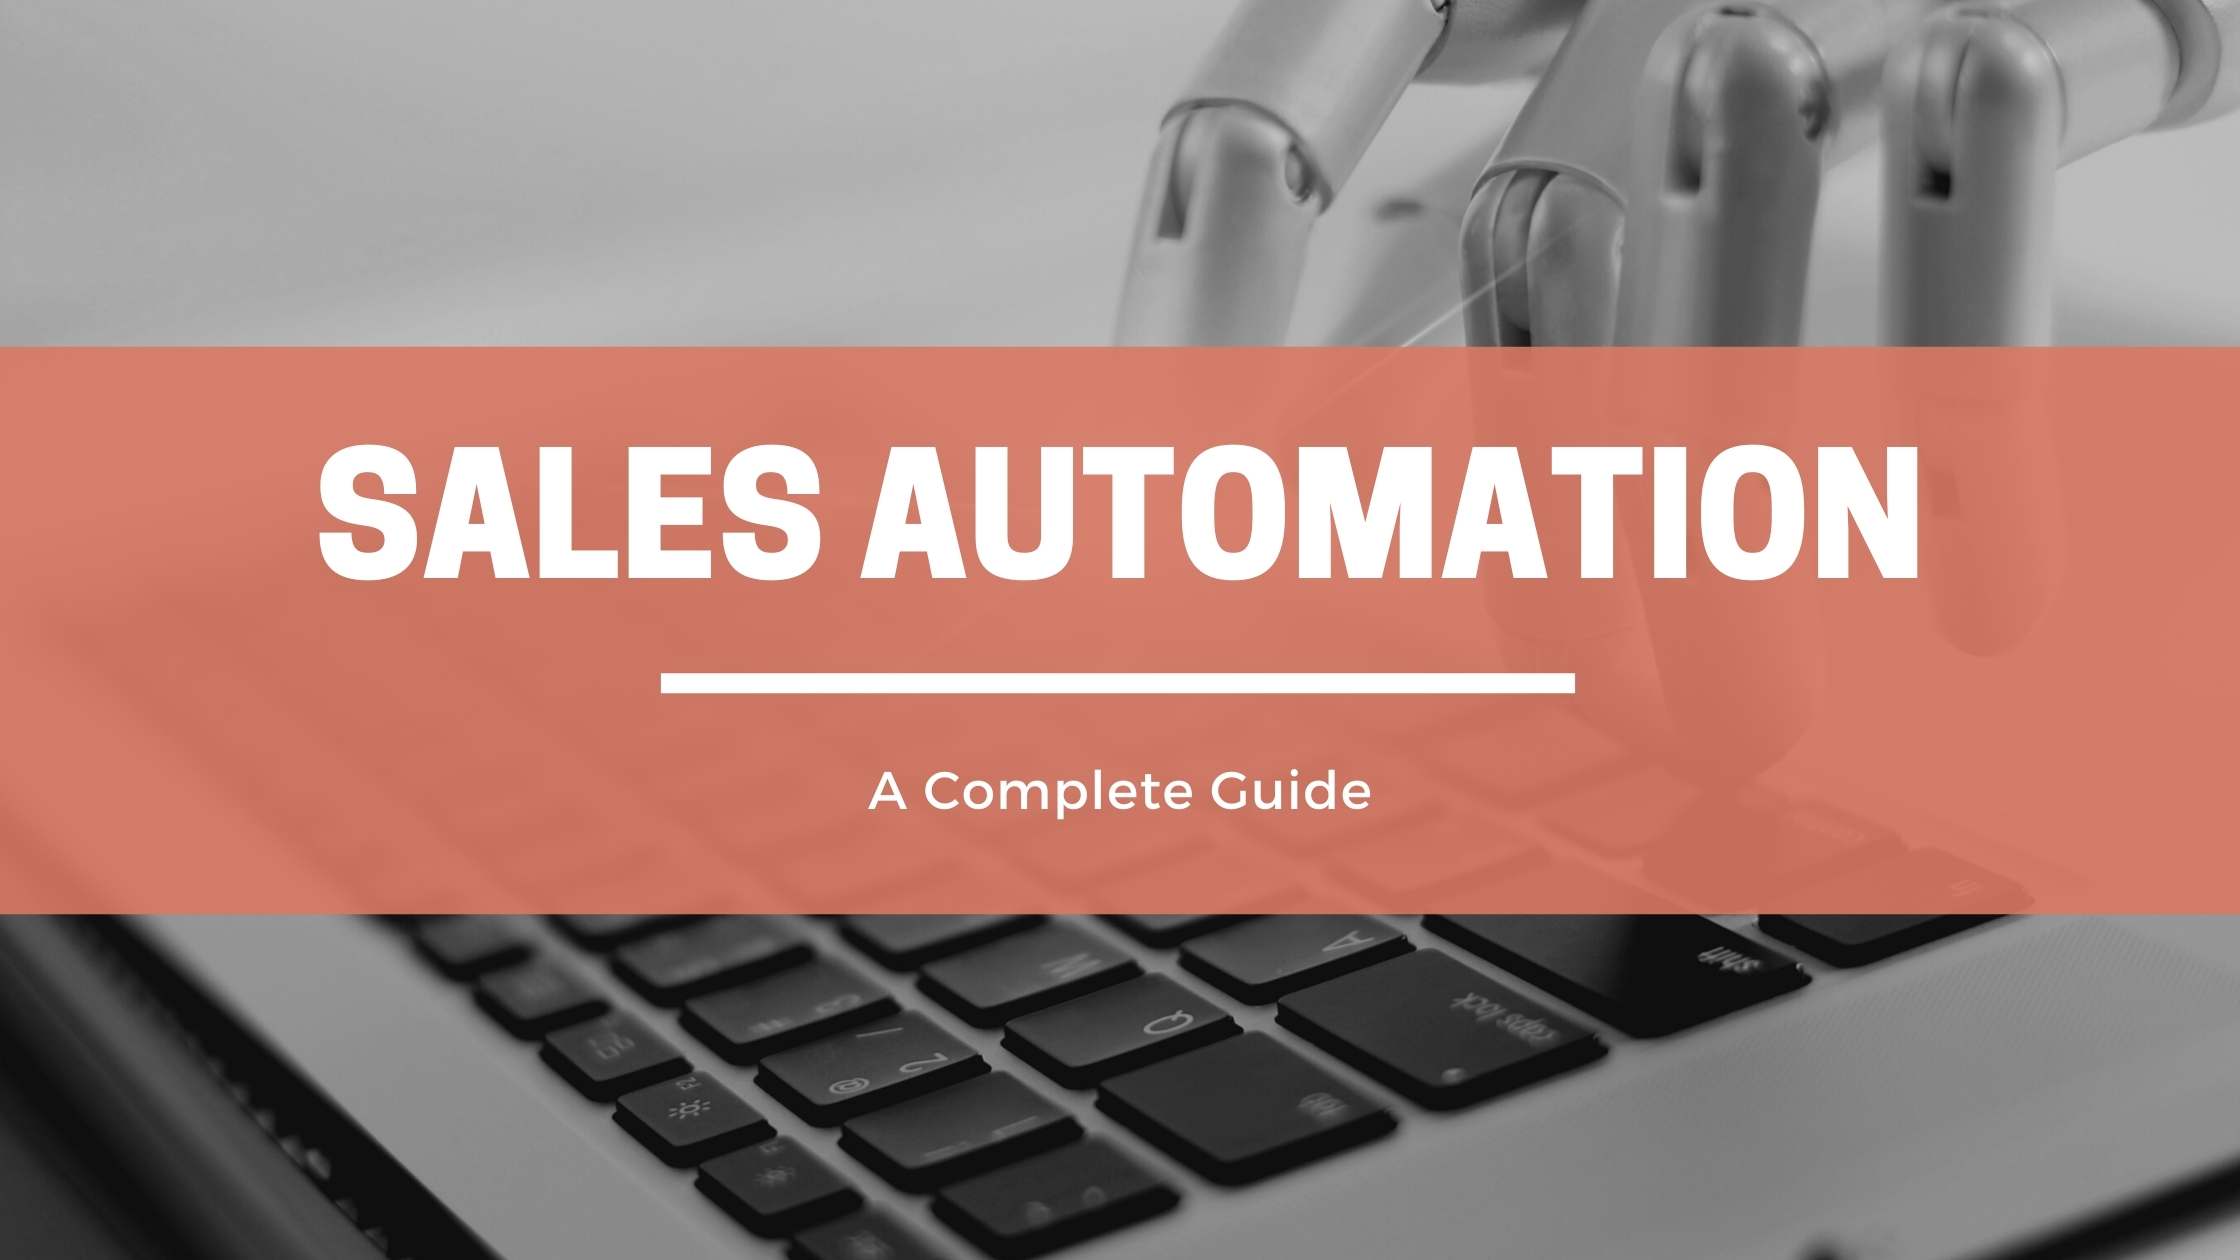 Robot typing on computer with sales automation text.